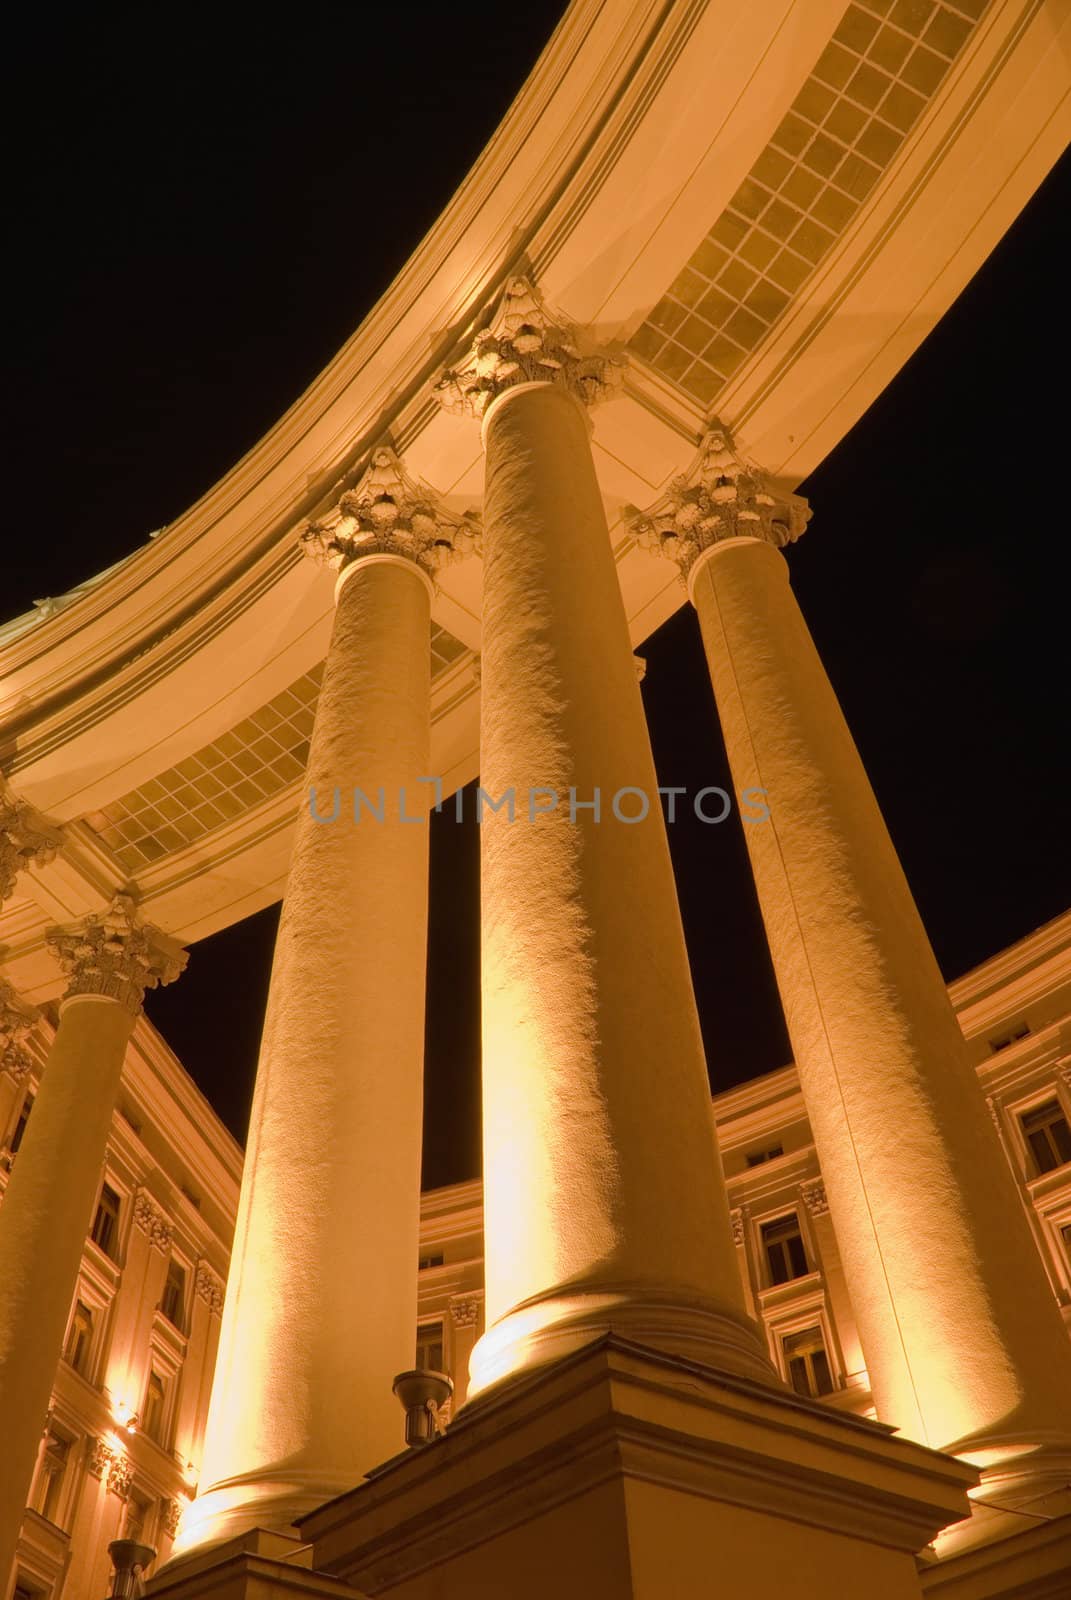 Columns of a building. A night photo, light from street lanterns